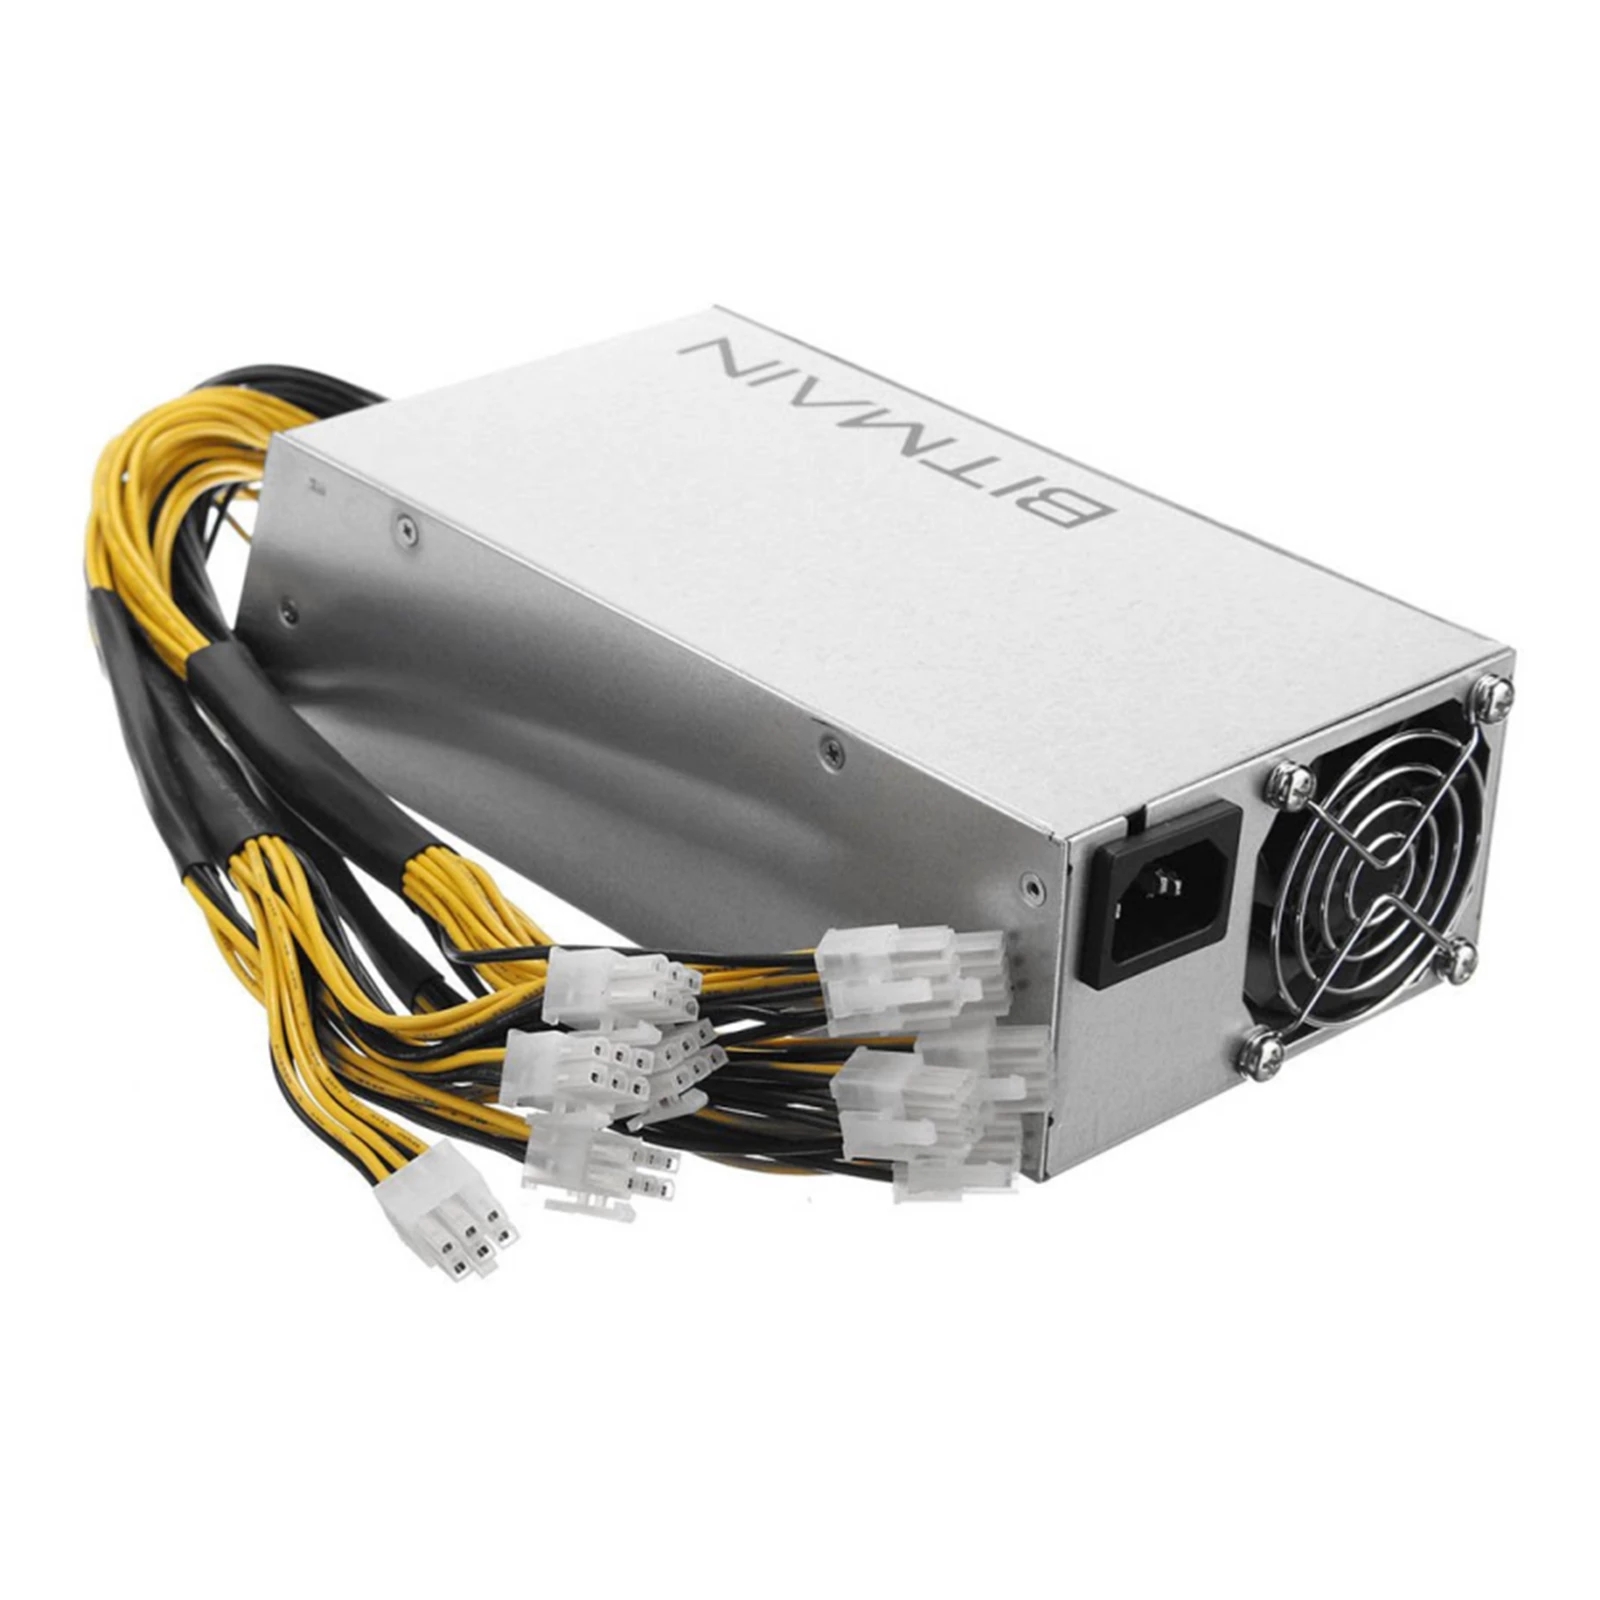 2022 Good Quality Antminer S7 Configuration - ASIC miner ANTMINER L3+ 504M/S Bitmmin LTC Scrypt Miner  – Goalwin